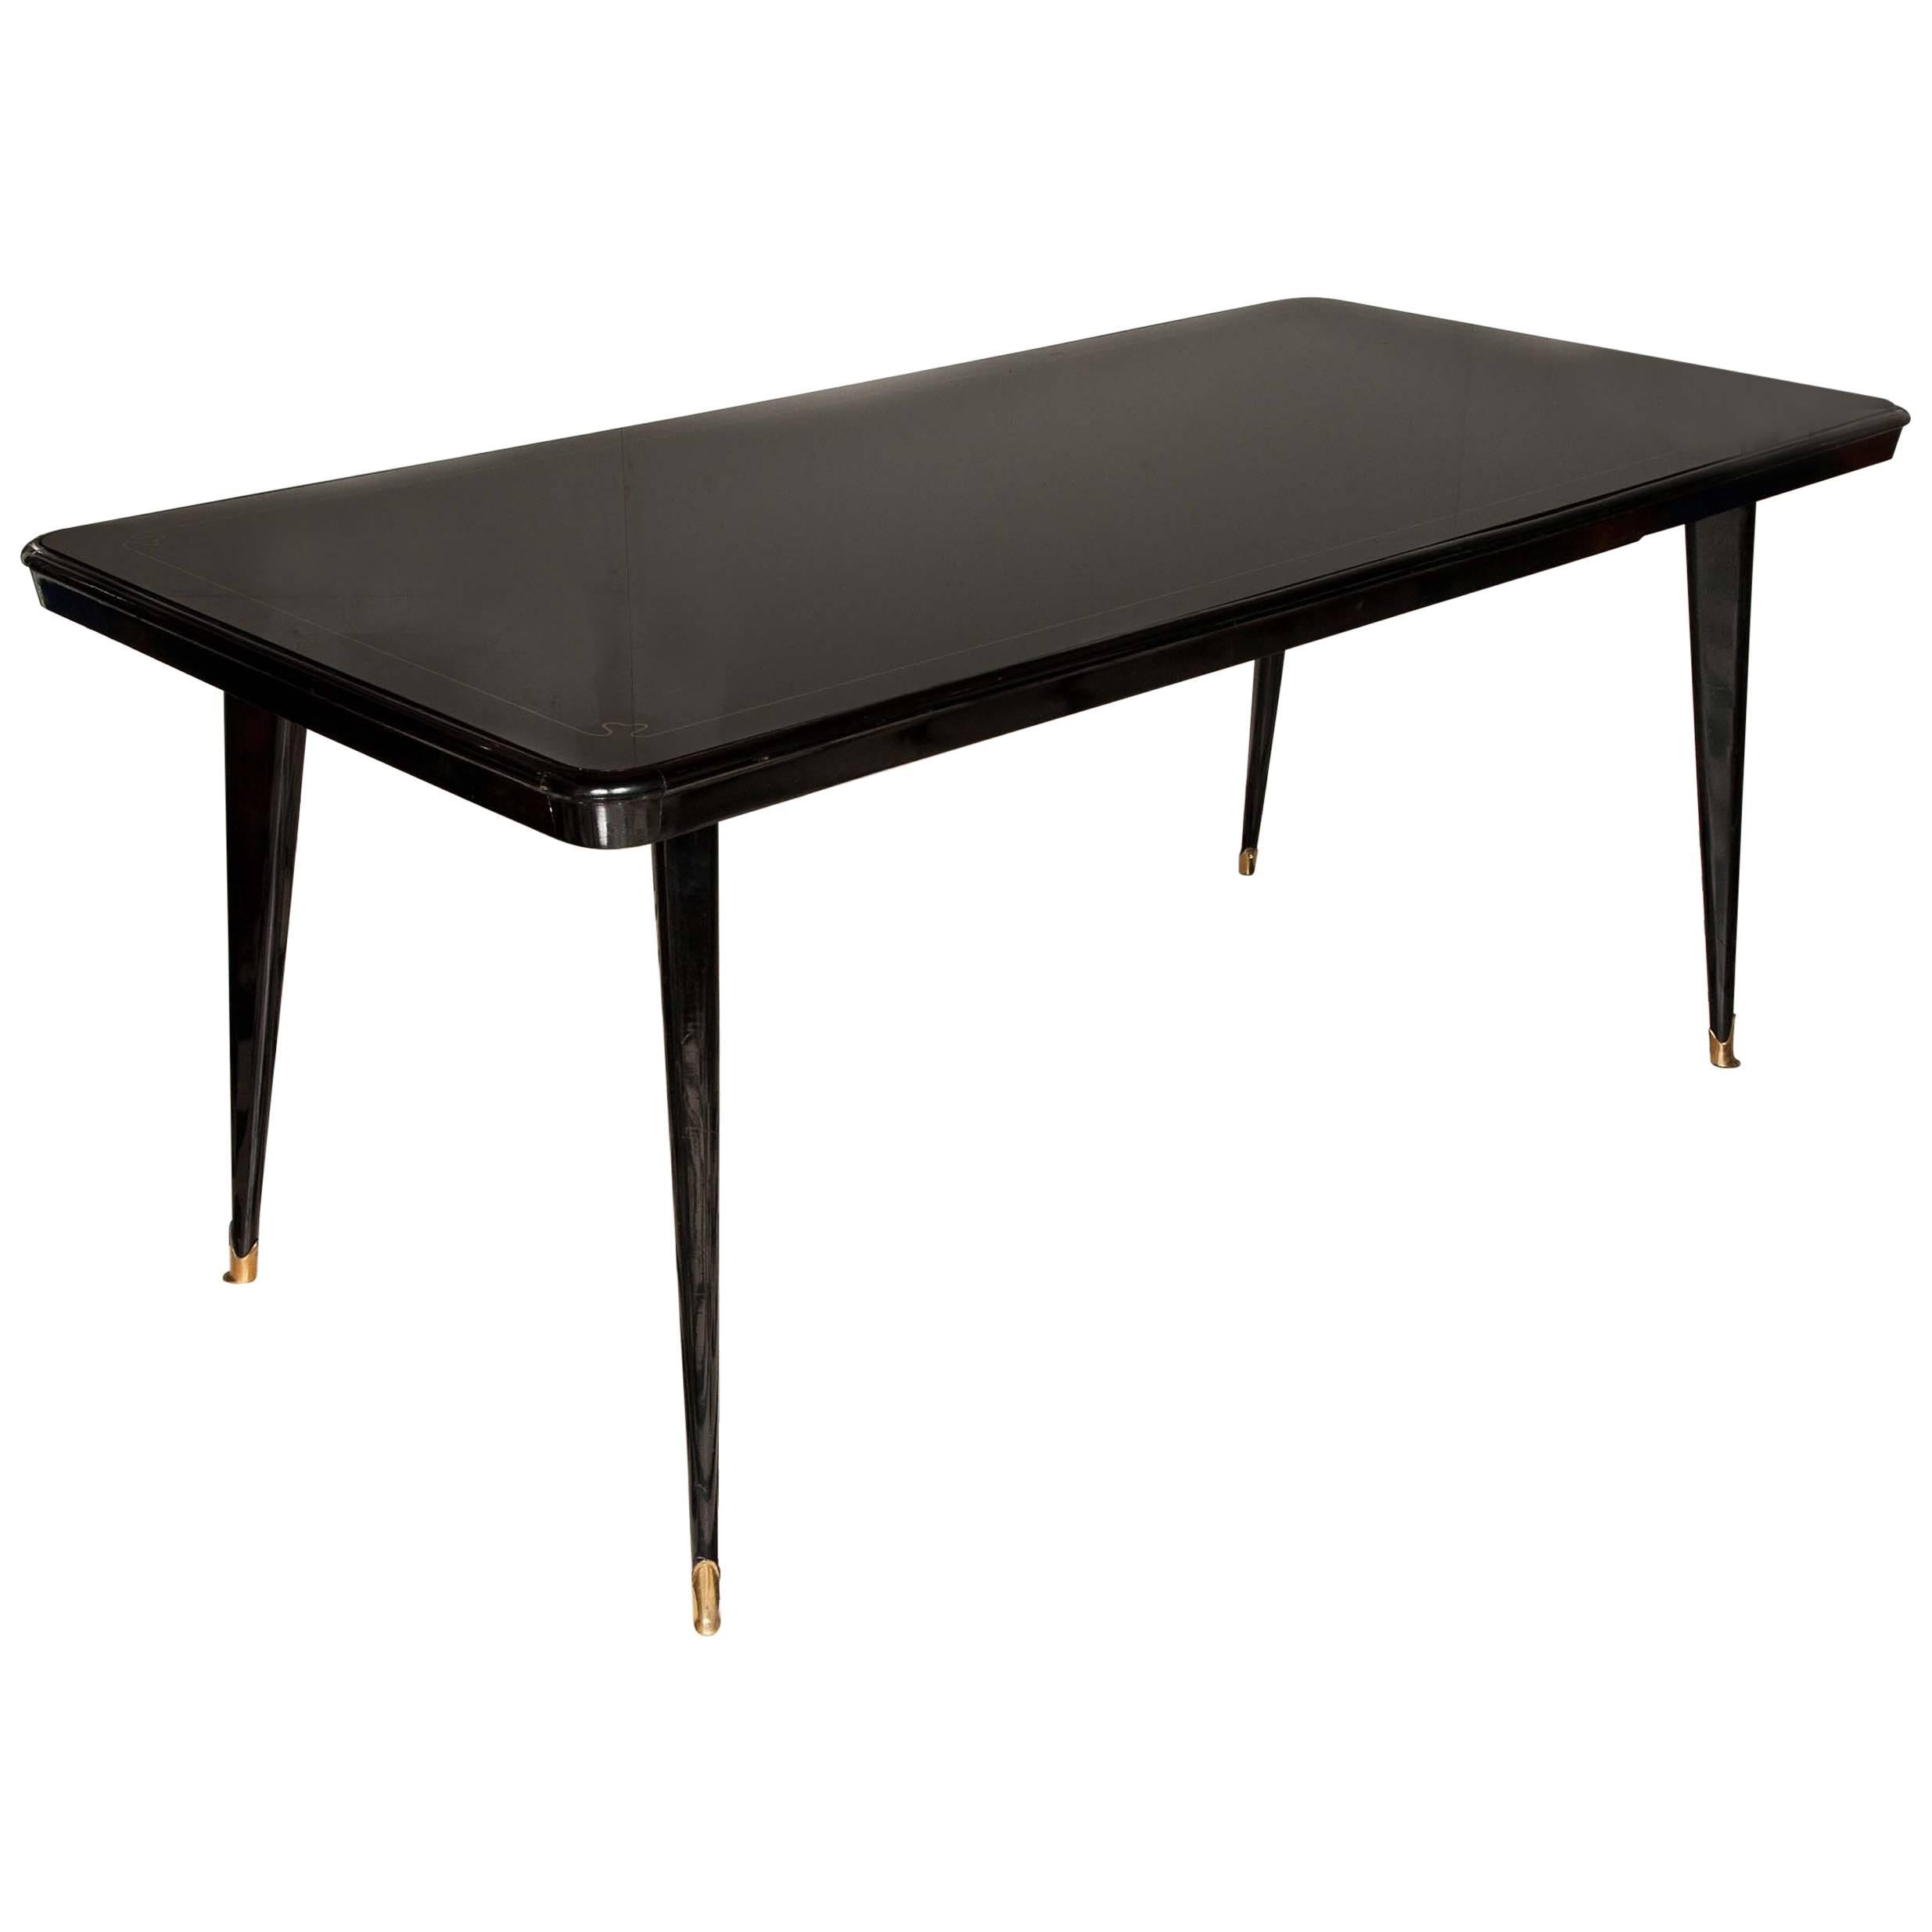 1945-1950s Italian Black Lacca Dining Table in the manner of Guglielmo Ulrich